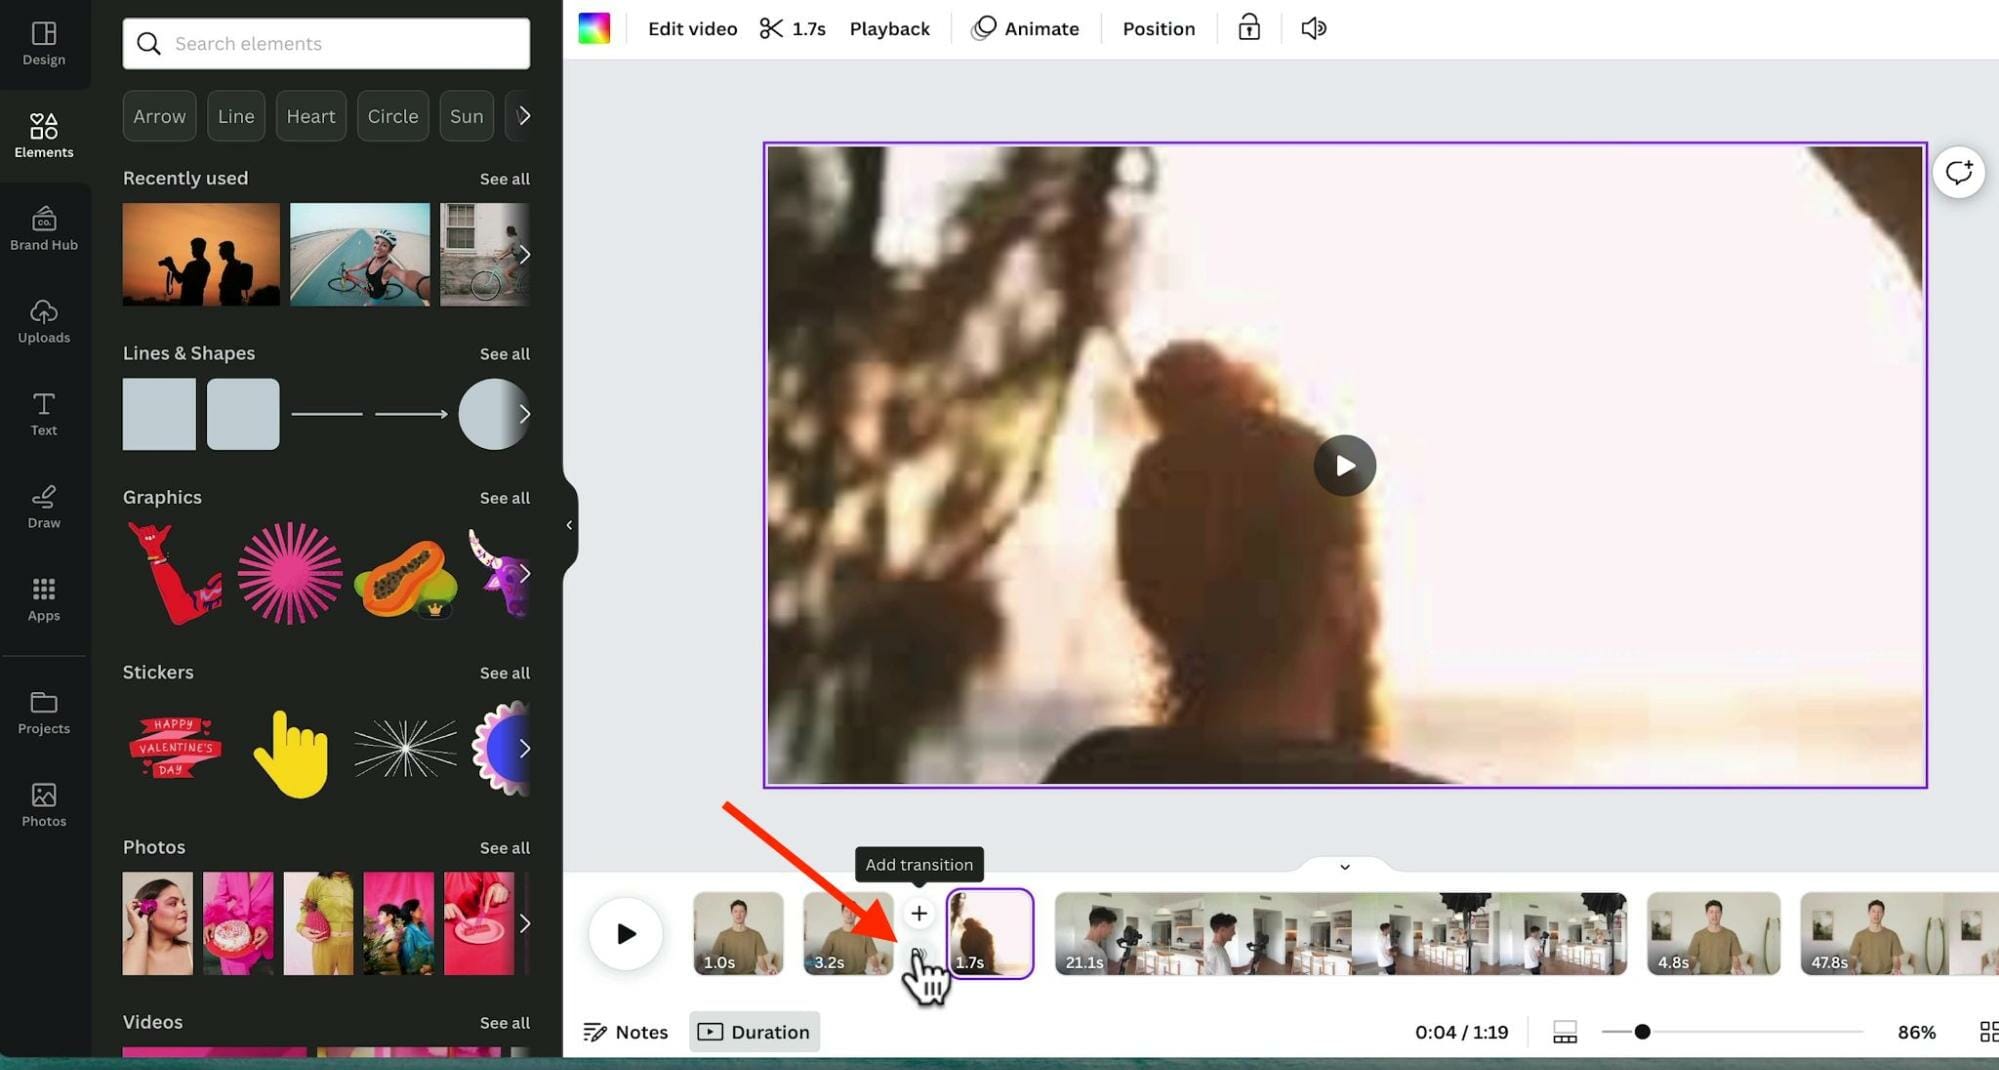 Transition button in between clips in Canva video timeline